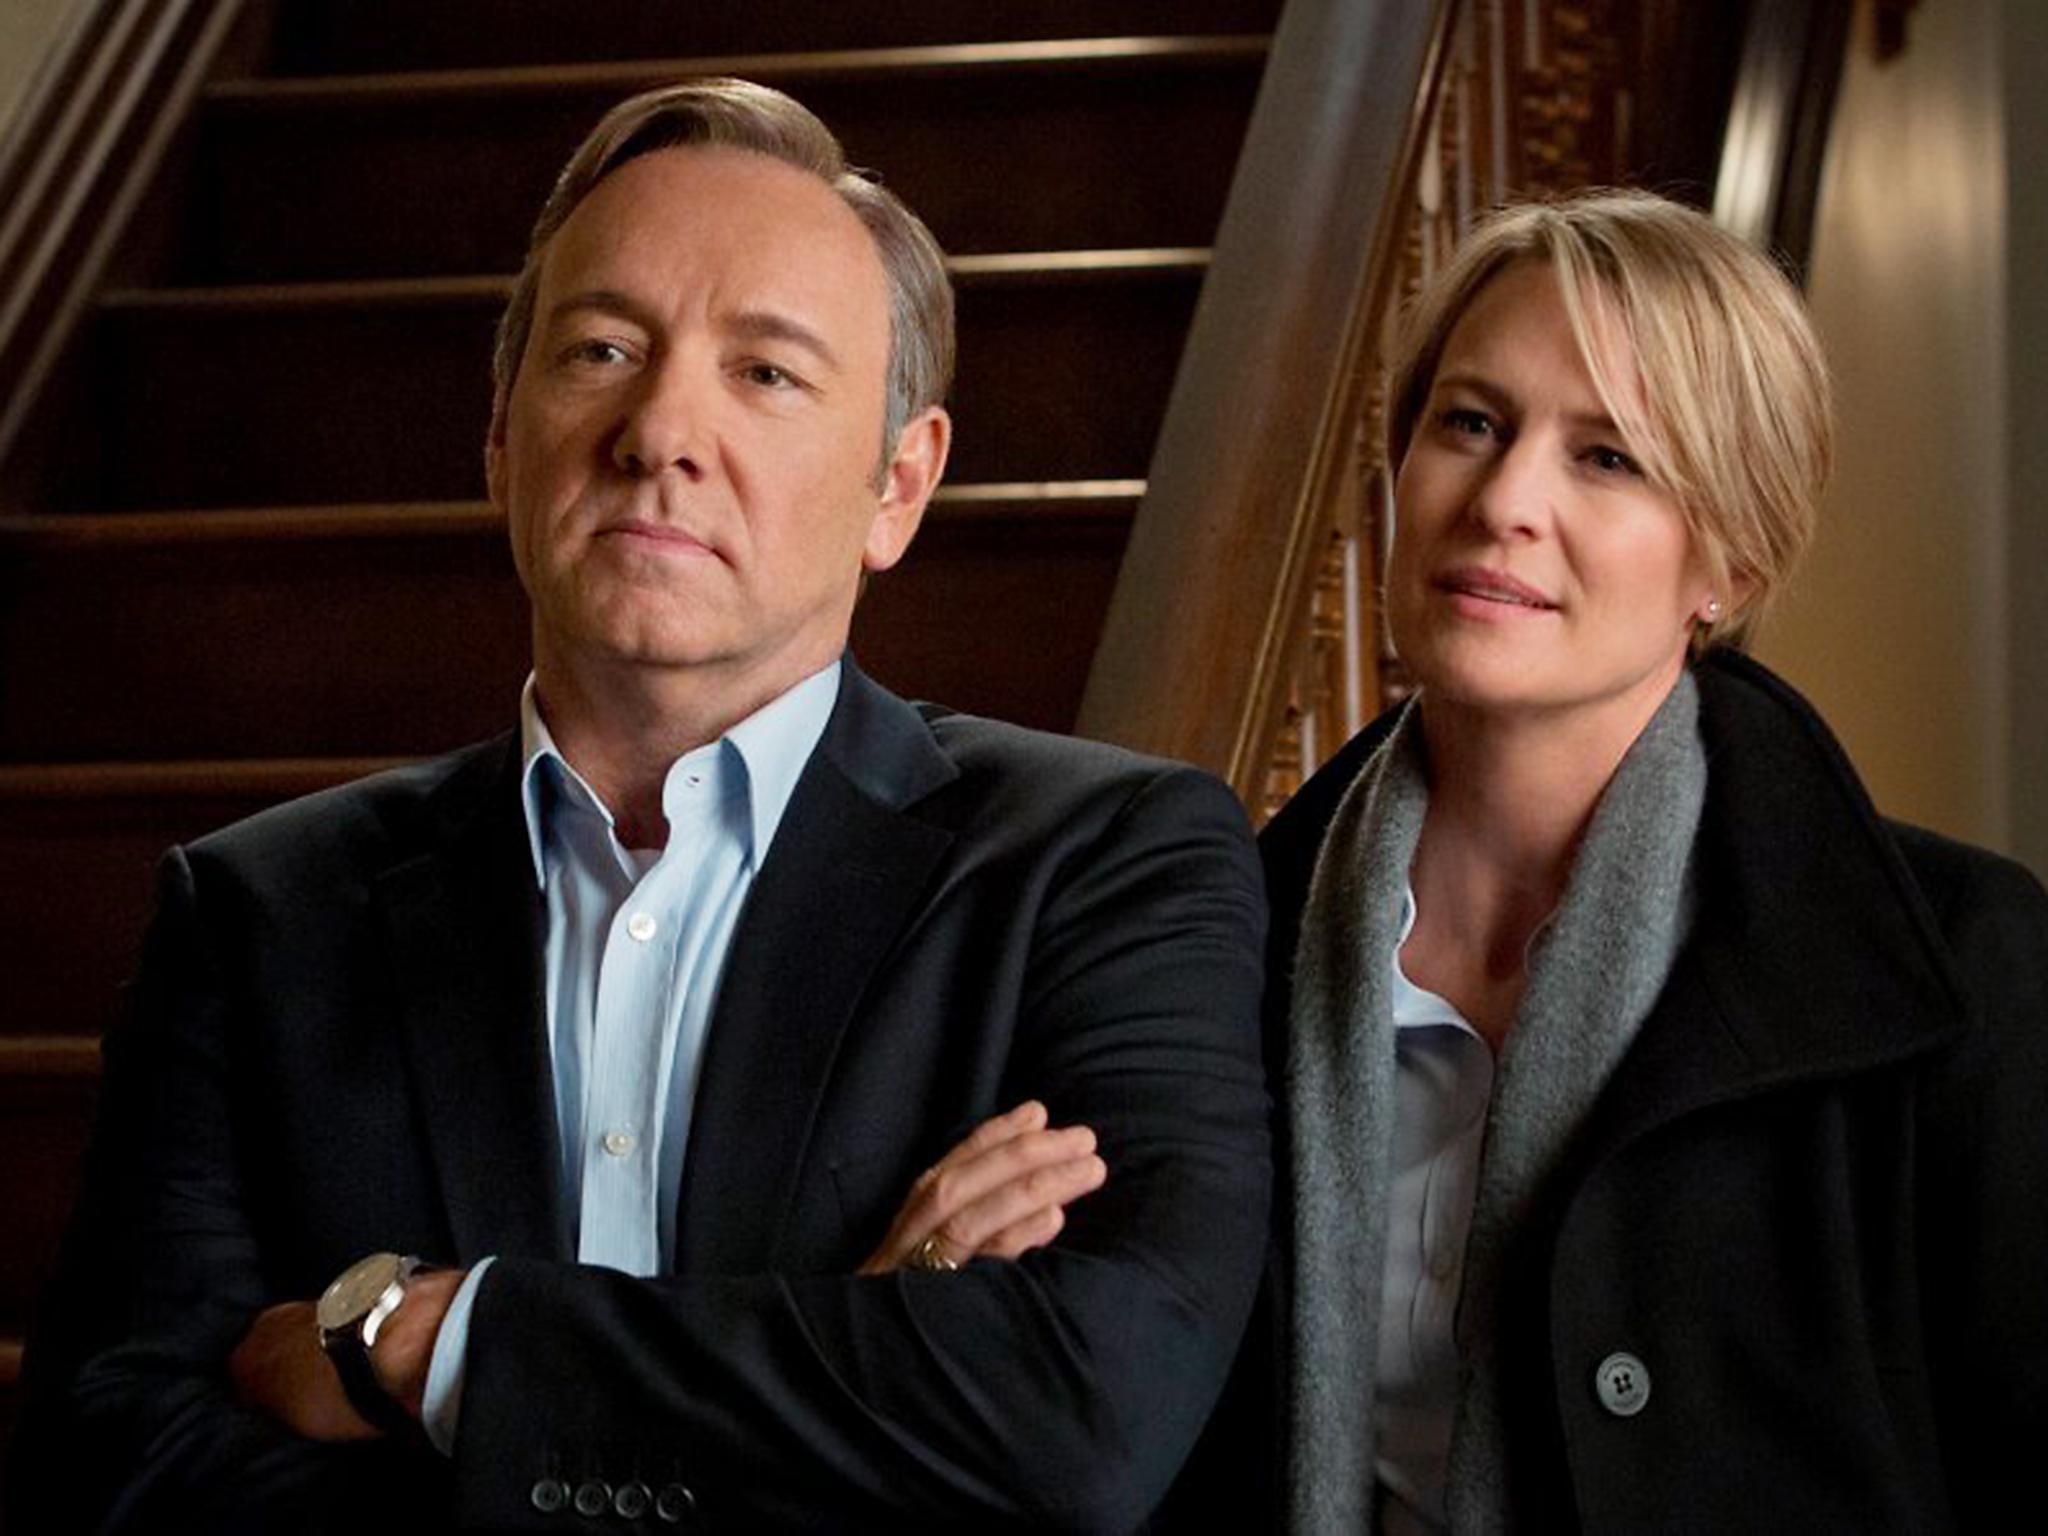 US political drama faces challenges after Trump was elected including Netflix's 'House of Cards', starring Kevin Spacey and Robin Wright